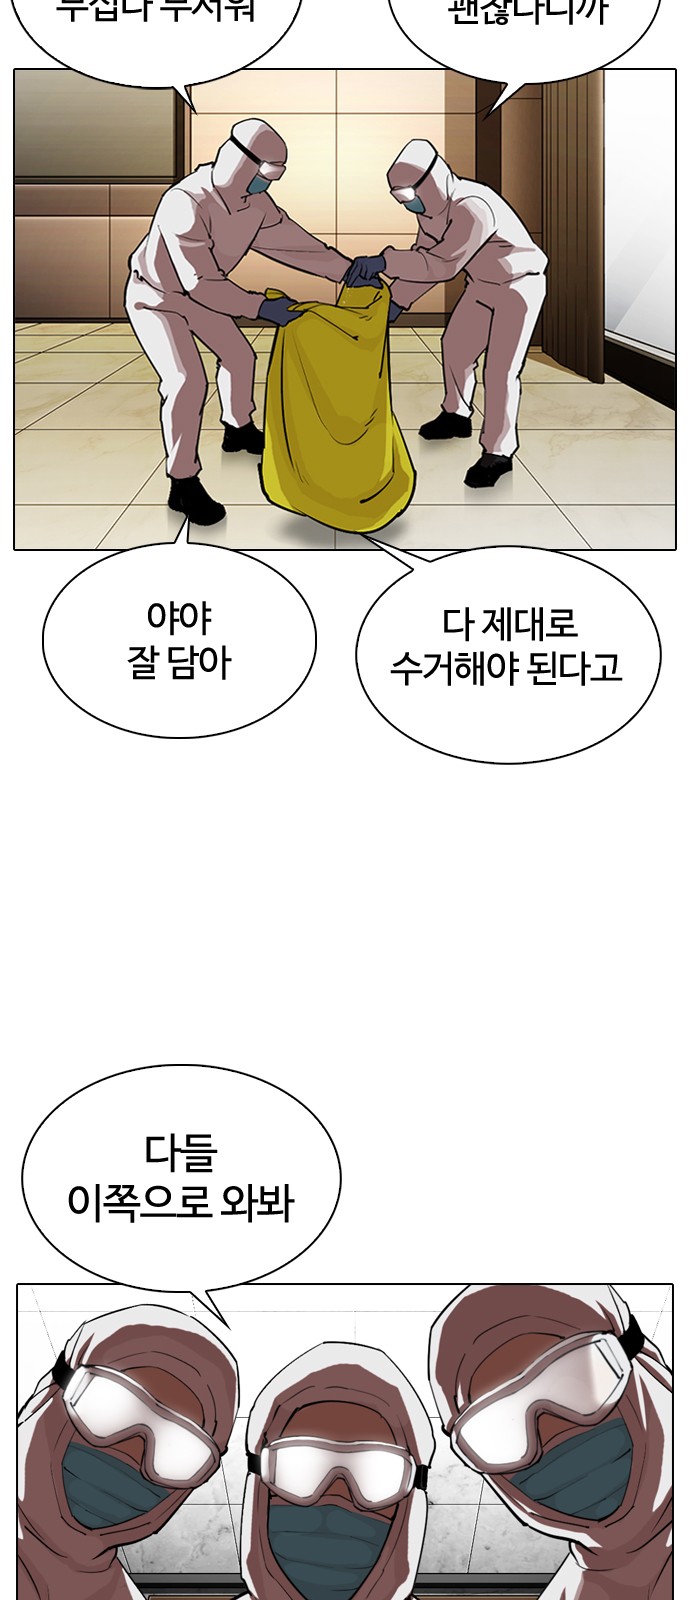 Lookism - Chapter 320 - Page 3